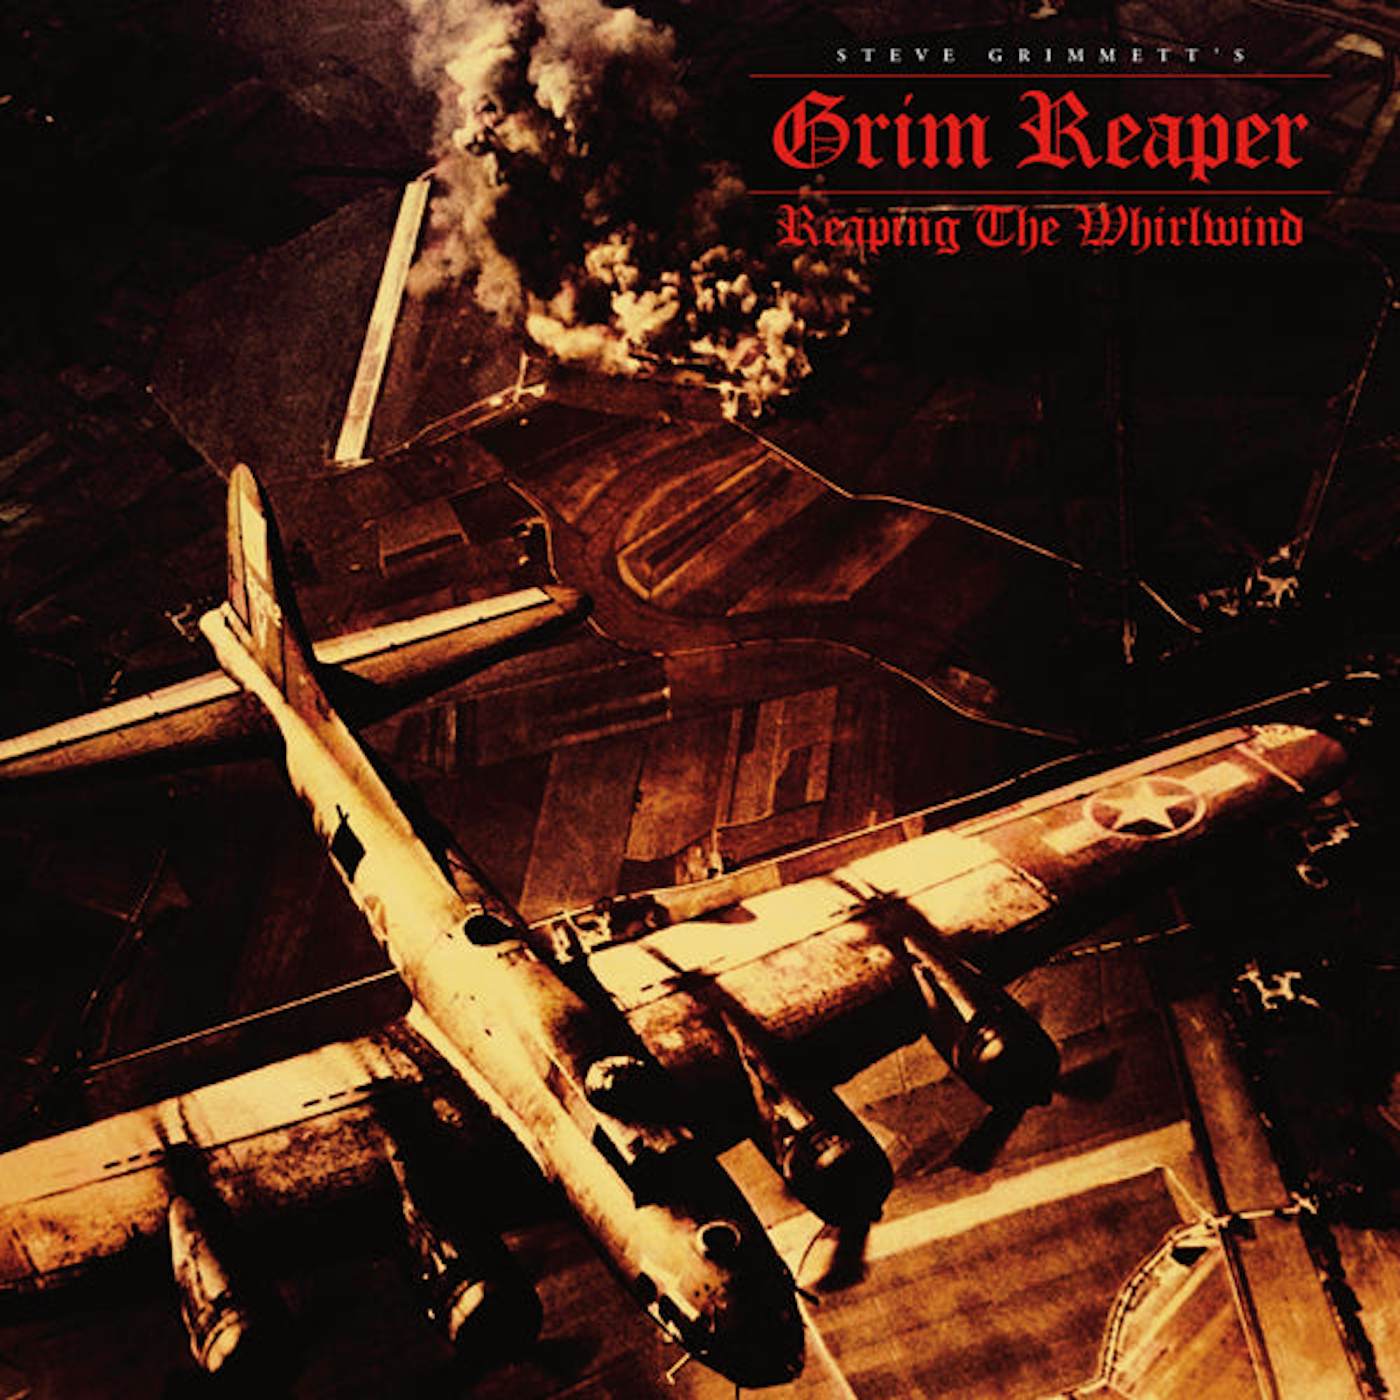 Grim Reaper Reaping The Whirlwind: Live British Steel Festival vinyl record